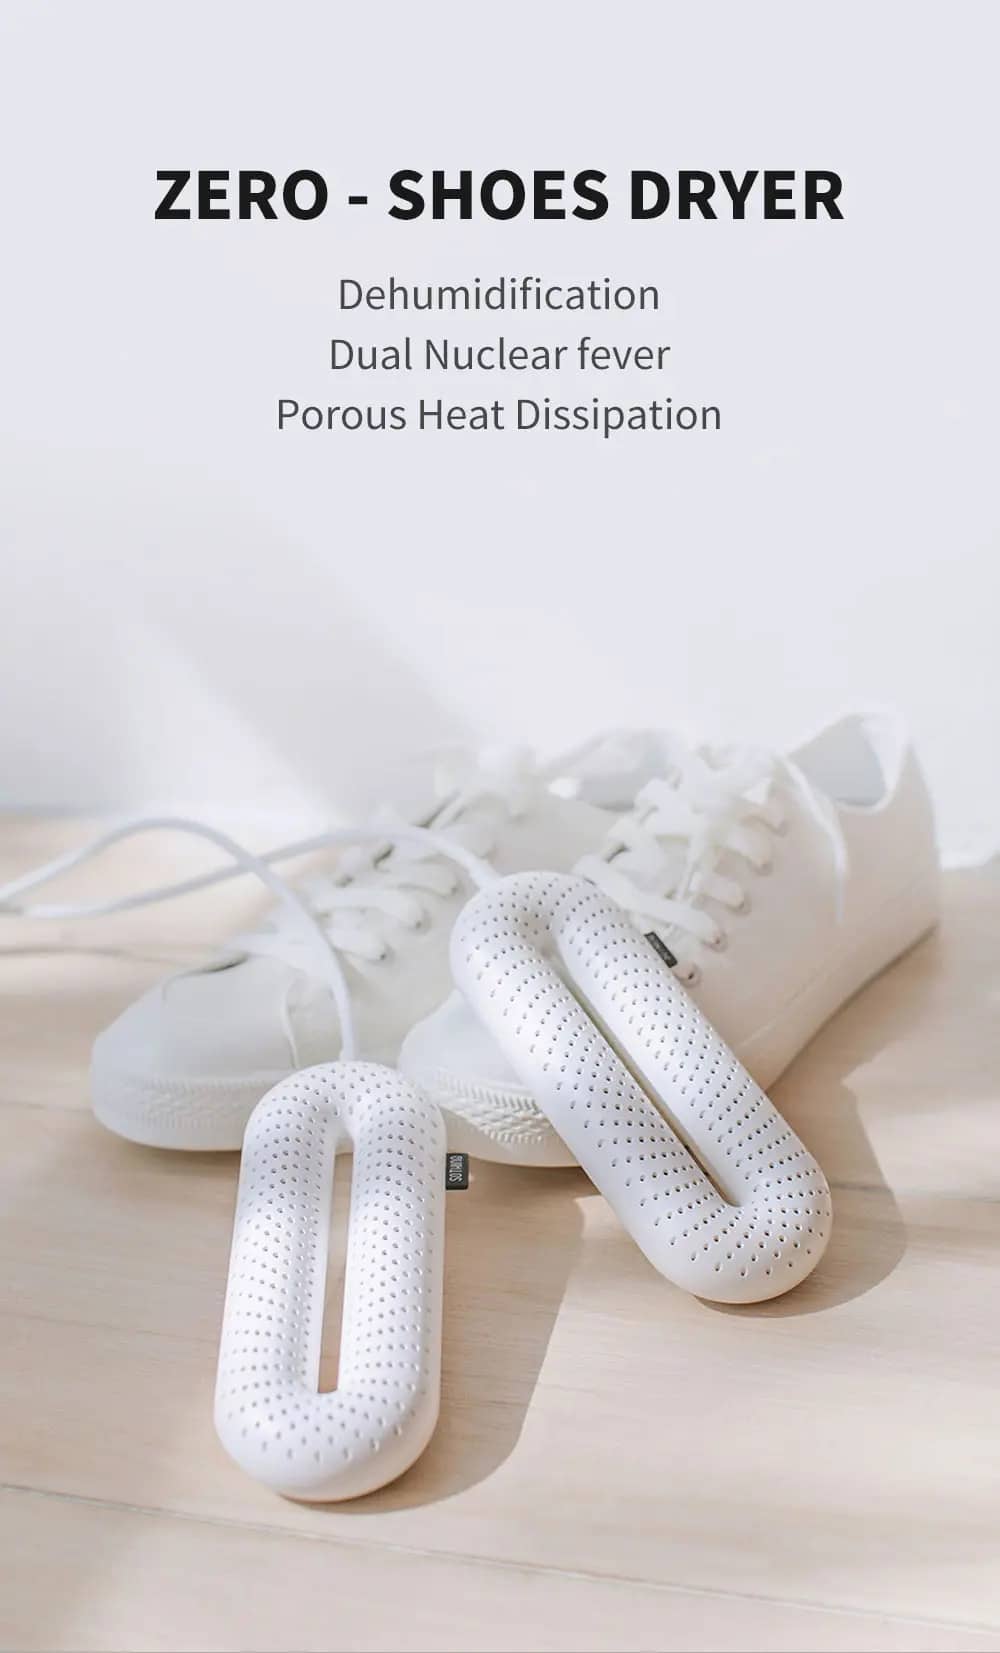 Sothing Zero-One Portable Electric Sterilization Shoe Shoes Dryer Constant Temperature Drying Deodorization